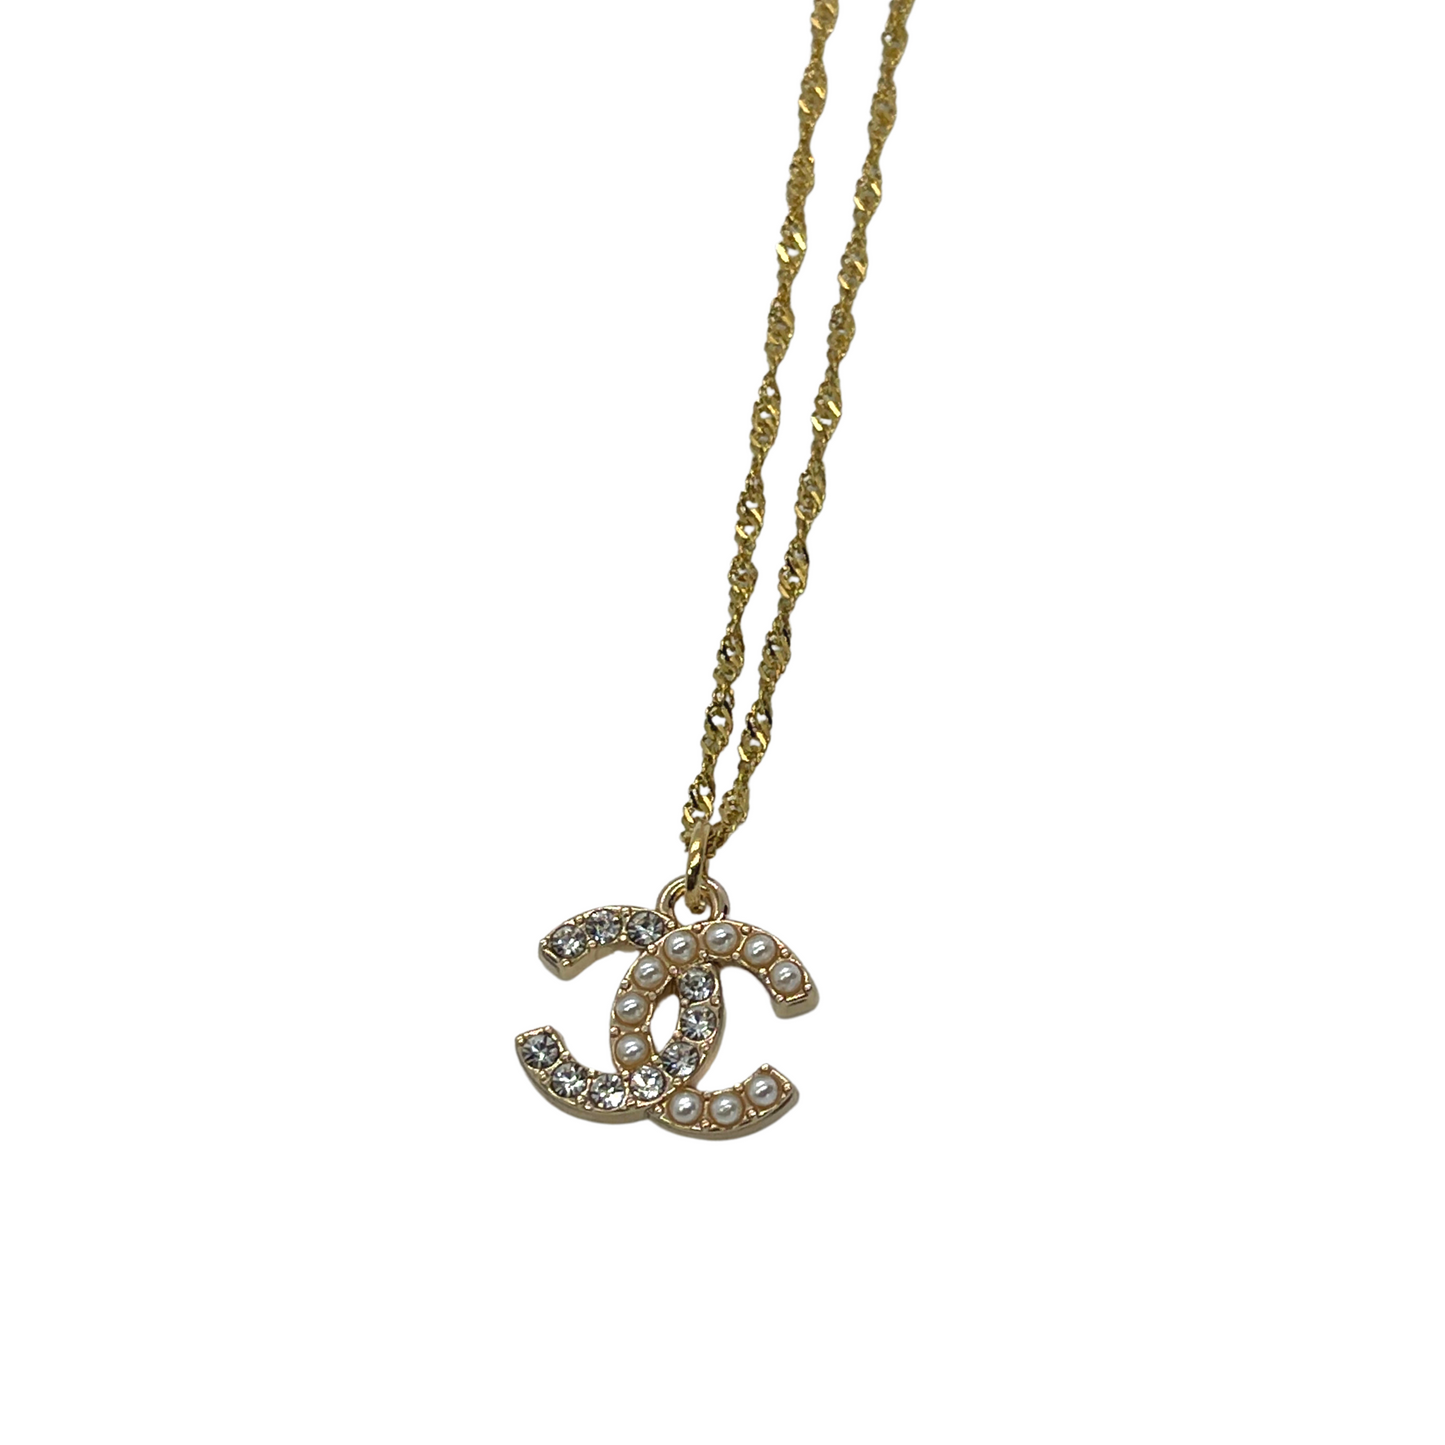 Authentic Chanel Half Crystal, Half Faux-Pearl Pendant